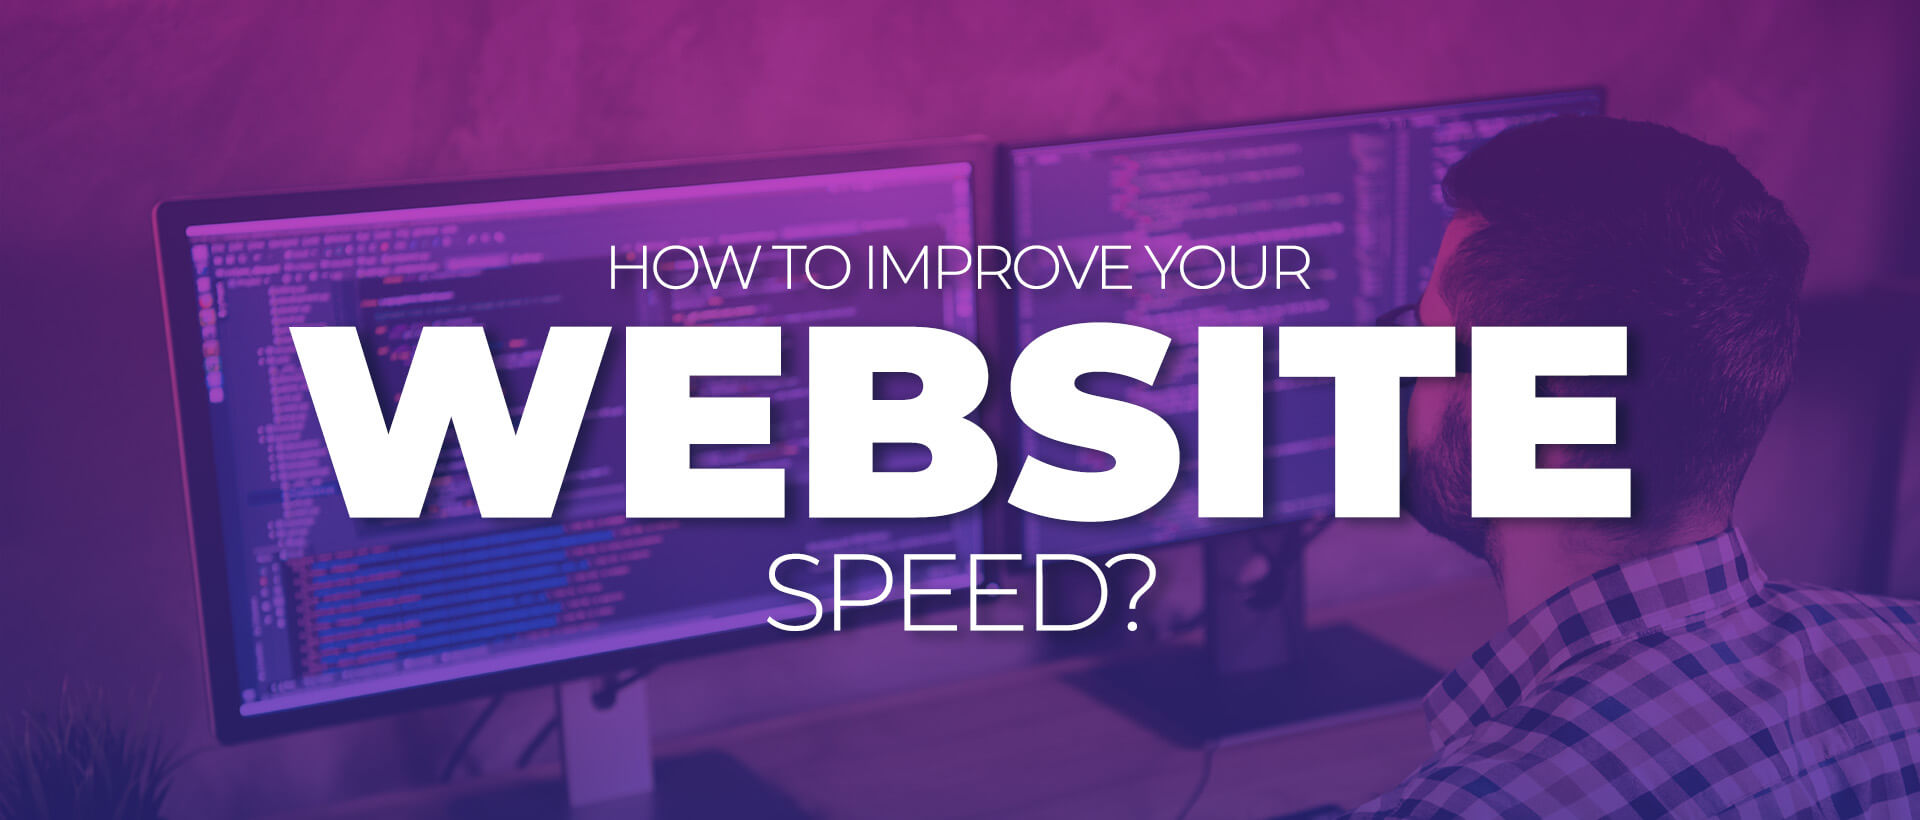 How to improve your website speed